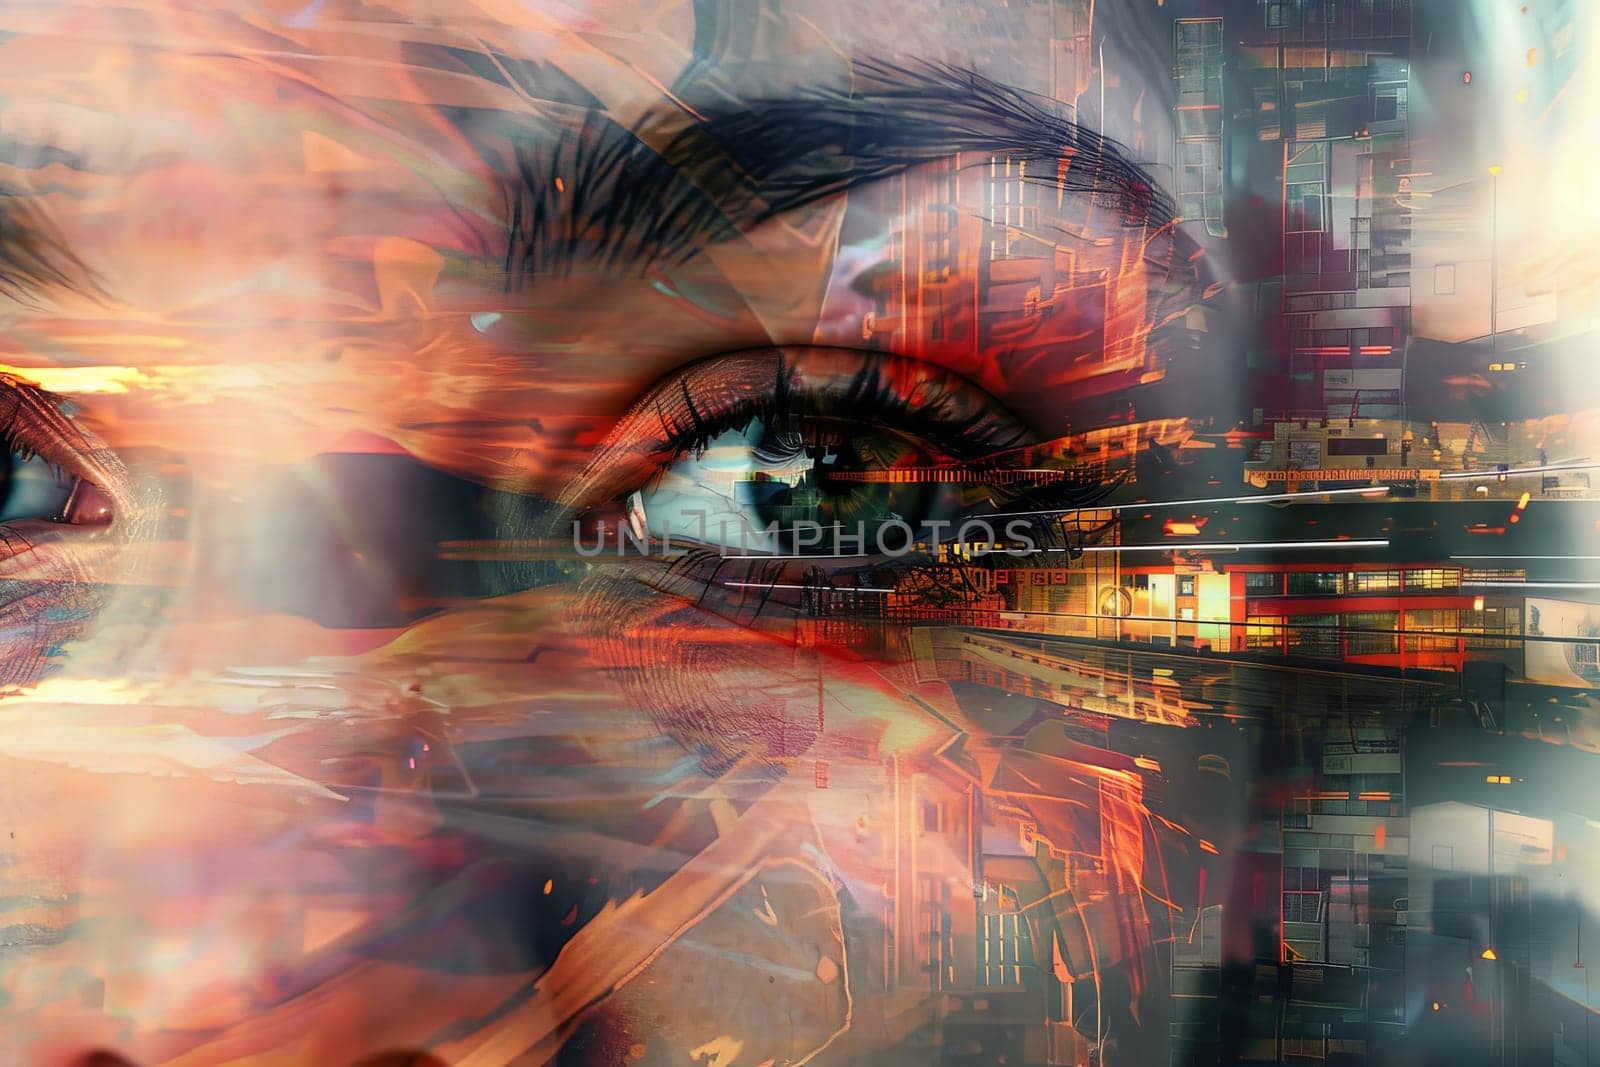 A blurry image of a woman's eye with a cityscape in the background. The eye is surrounded by a blurry, colorful frame, giving the impression of a dream or a surrealistic painting